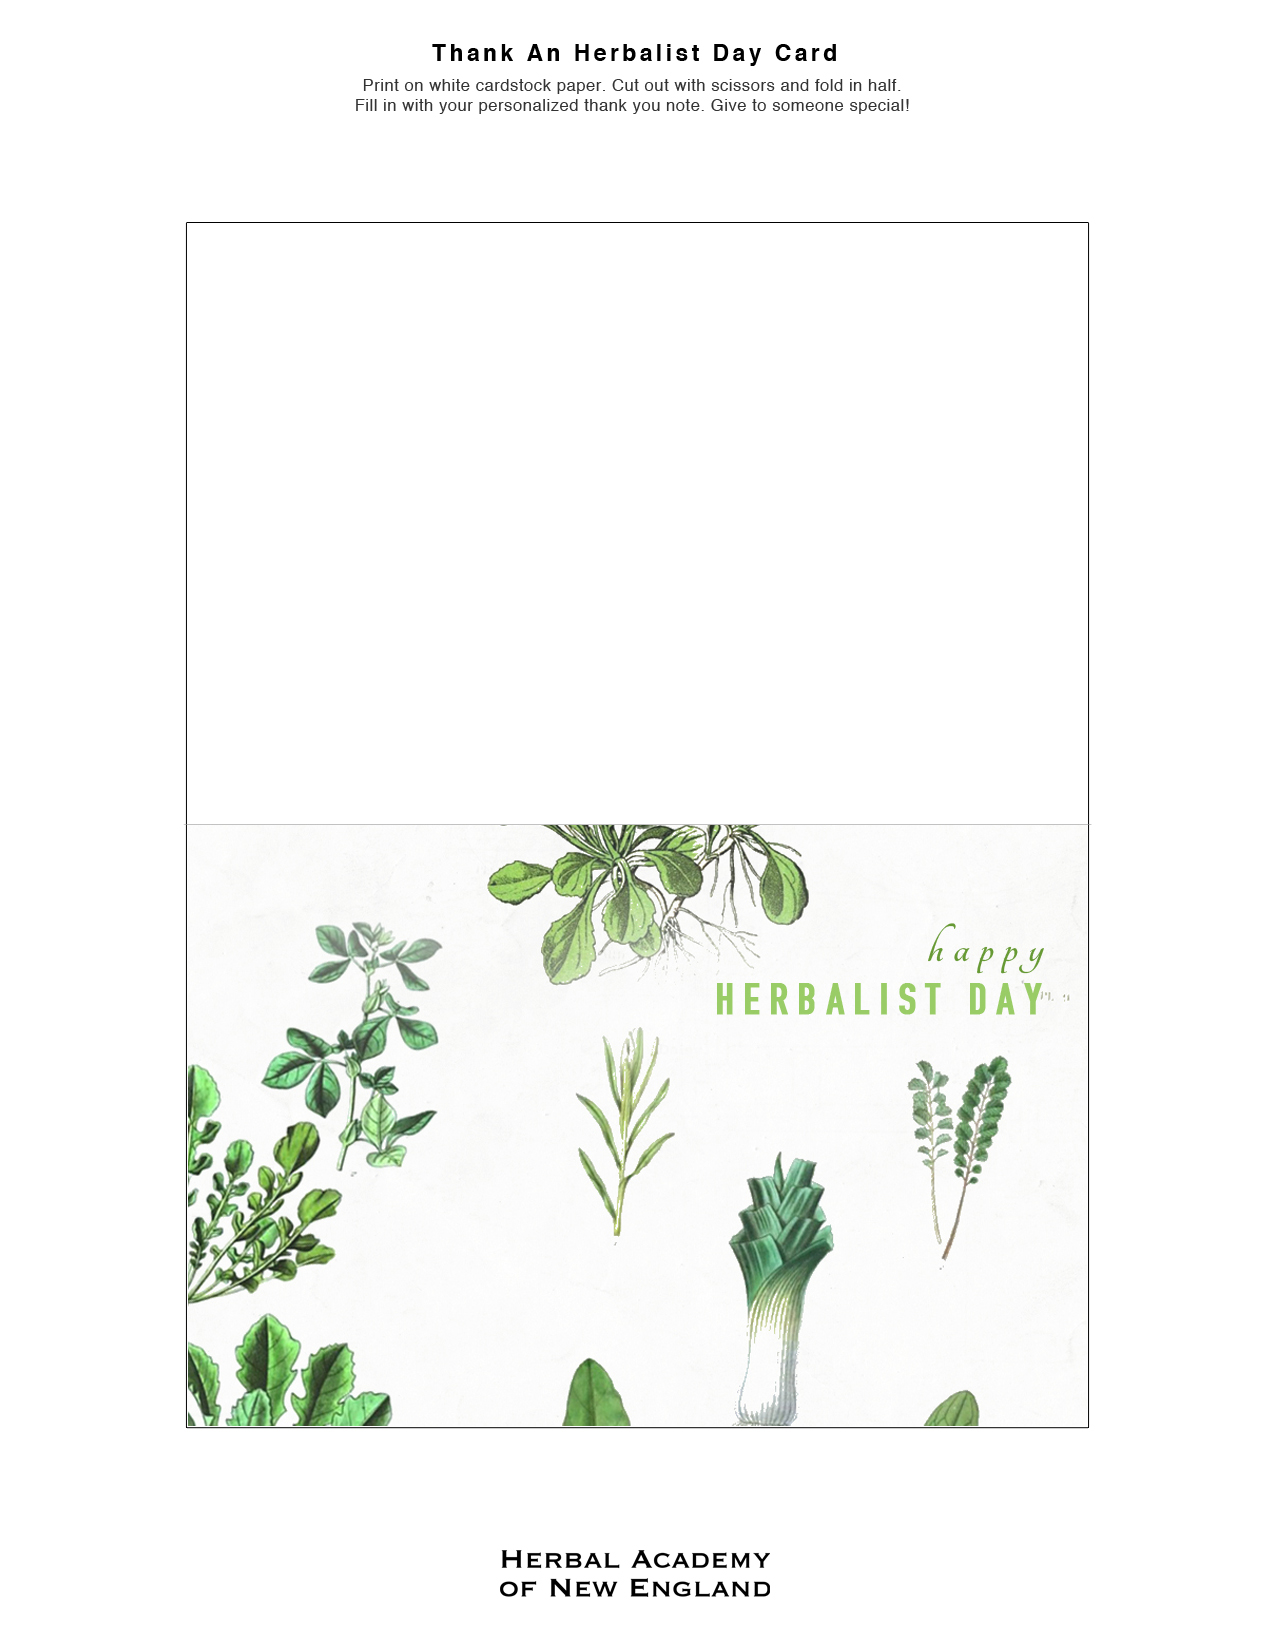 Thank An Herbalist Day | Herbal Academy | Thank an Herbalist Day on April 17th gives us the perfect opportunity to share with the people who have helped shaped us! Print these cards or give a gift!